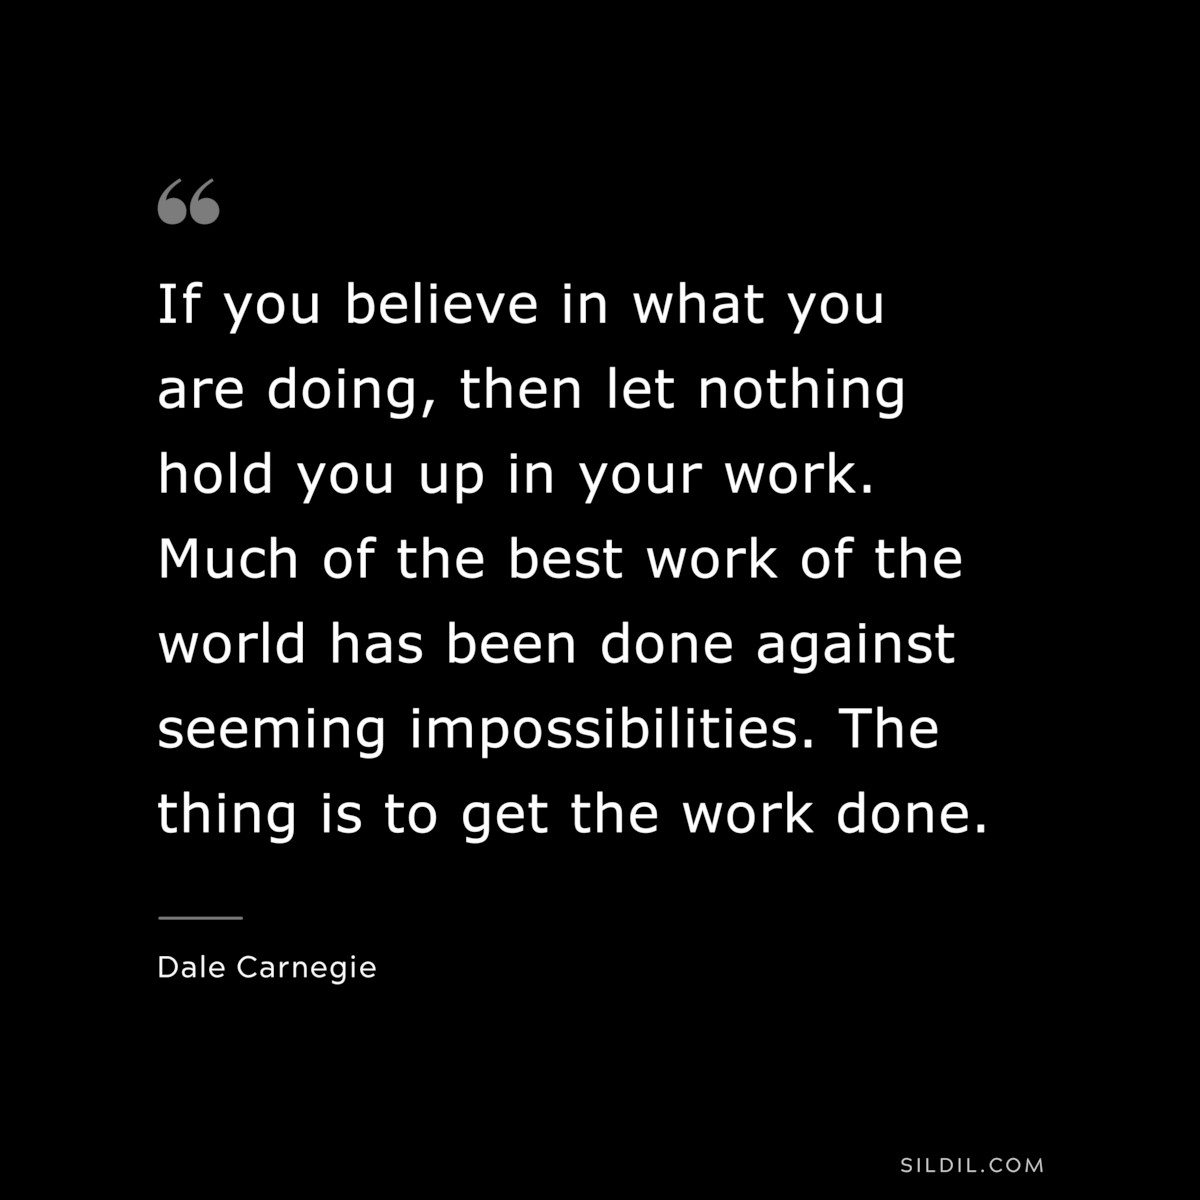 If you believe in what you are doing, then let nothing hold you up in your work. Much of the best work of the world has been done against seeming impossibilities. The thing is to get the work done.― Dale Carnegie